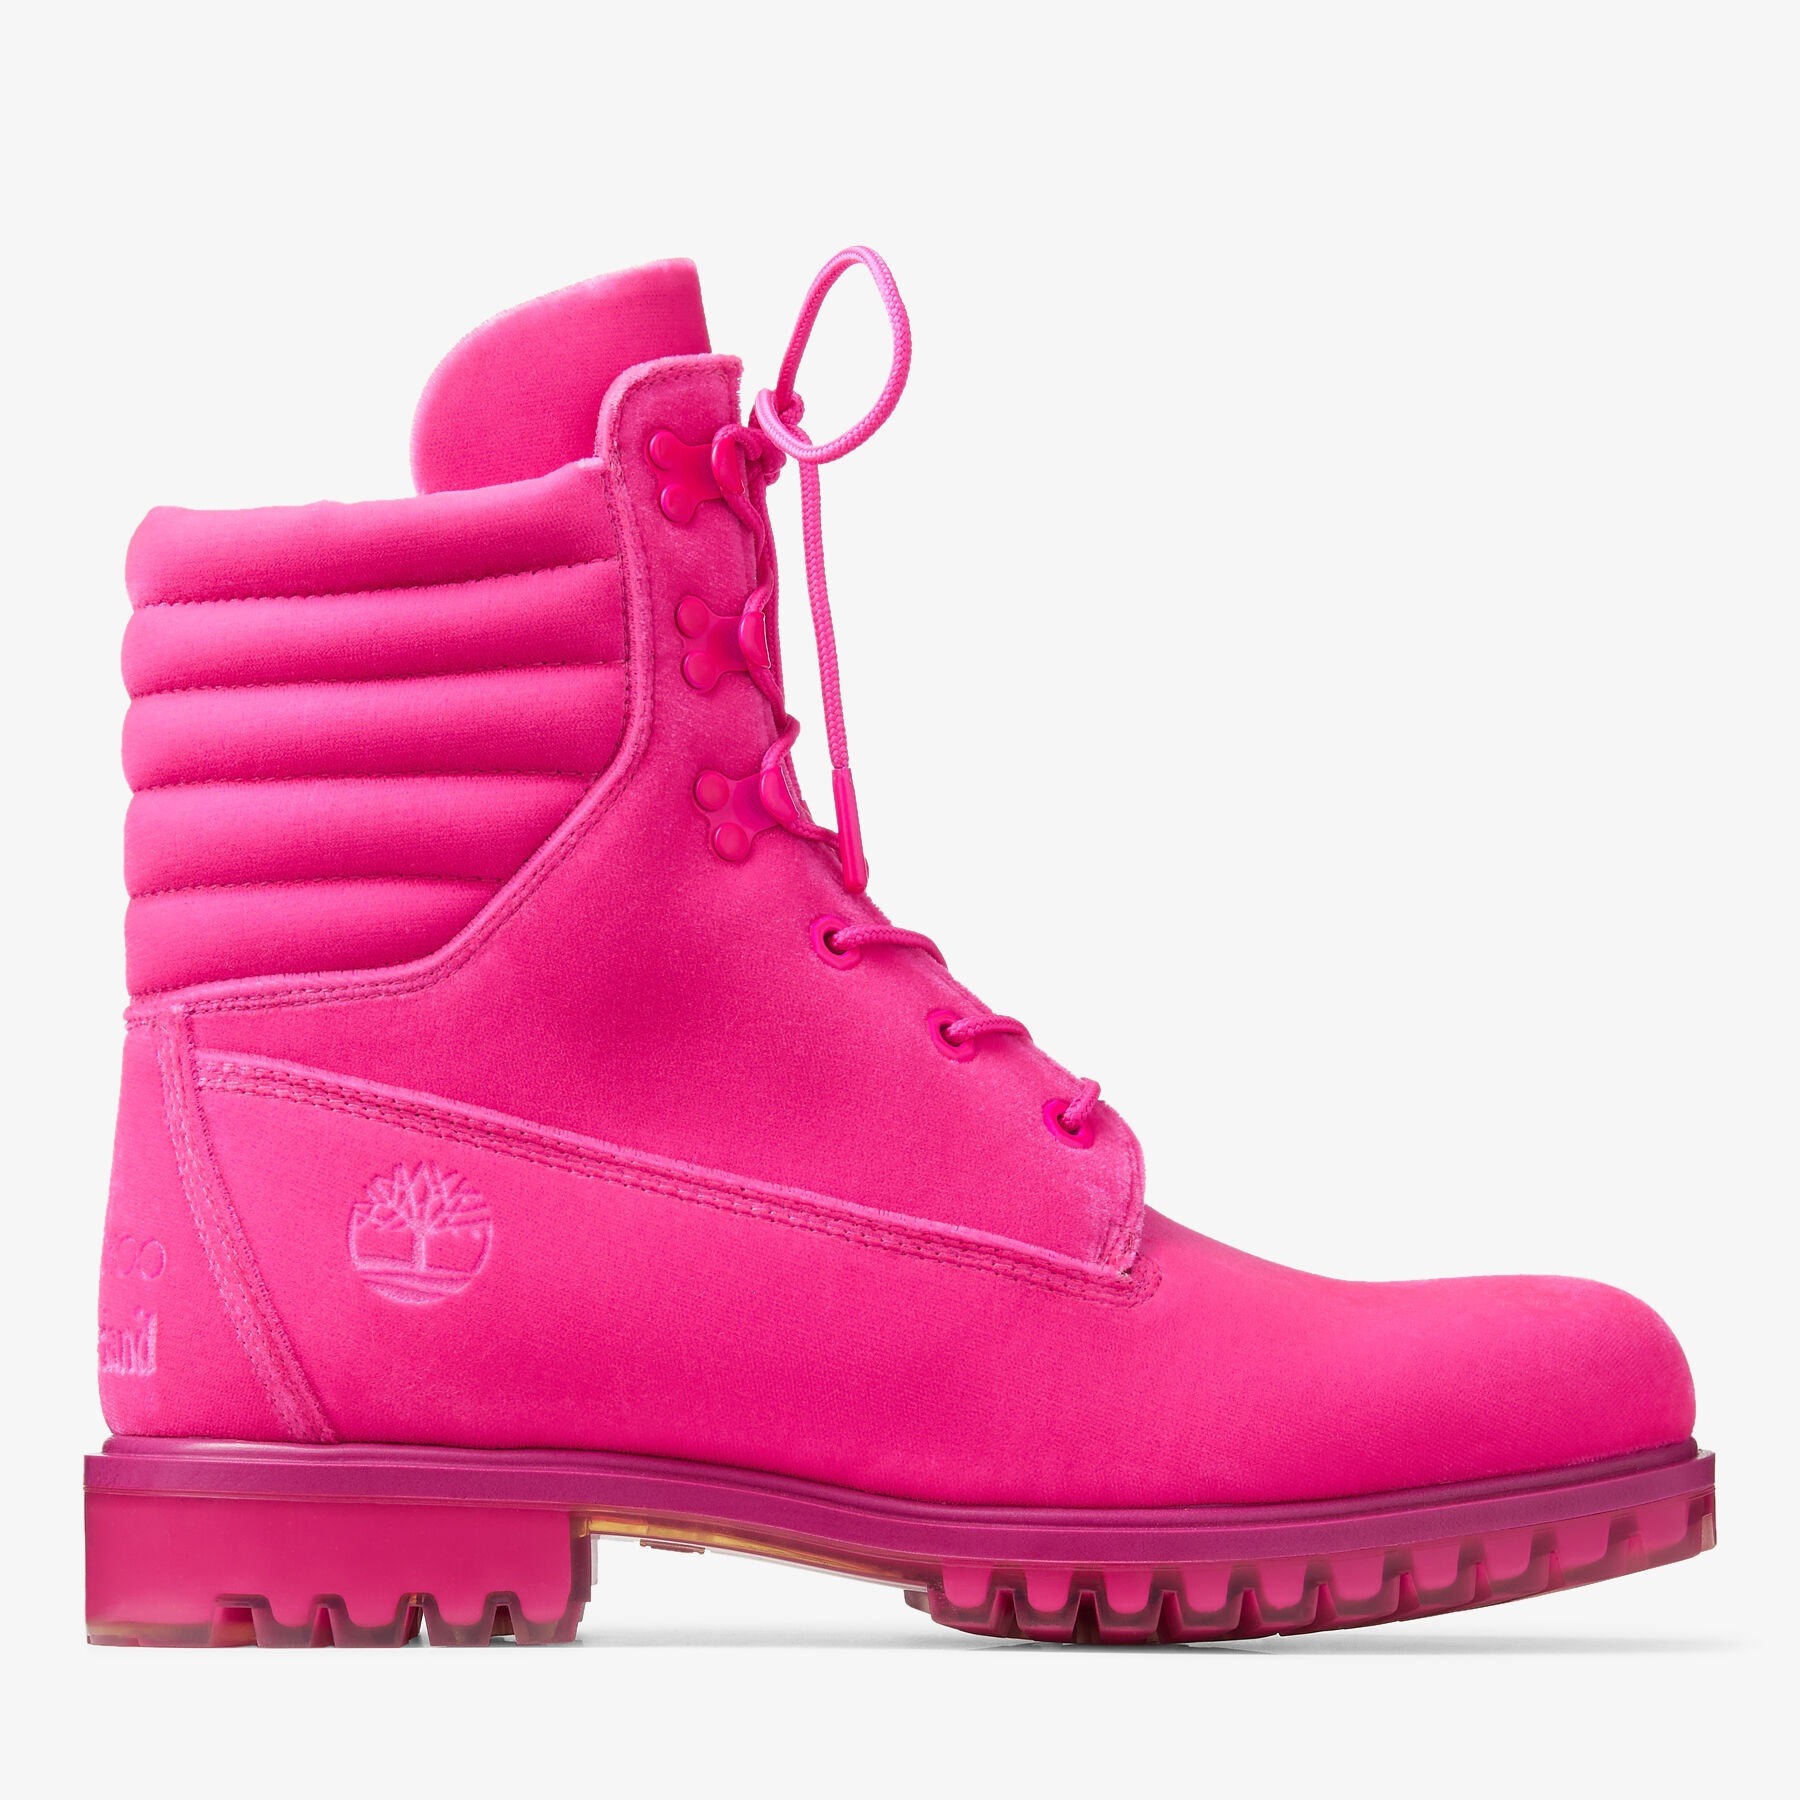 JIMMY CHOO X TIMBERLAND 8 INCH PUFFER BOOT
Hot Pink Timberland Velvet Ankle Boots - 1